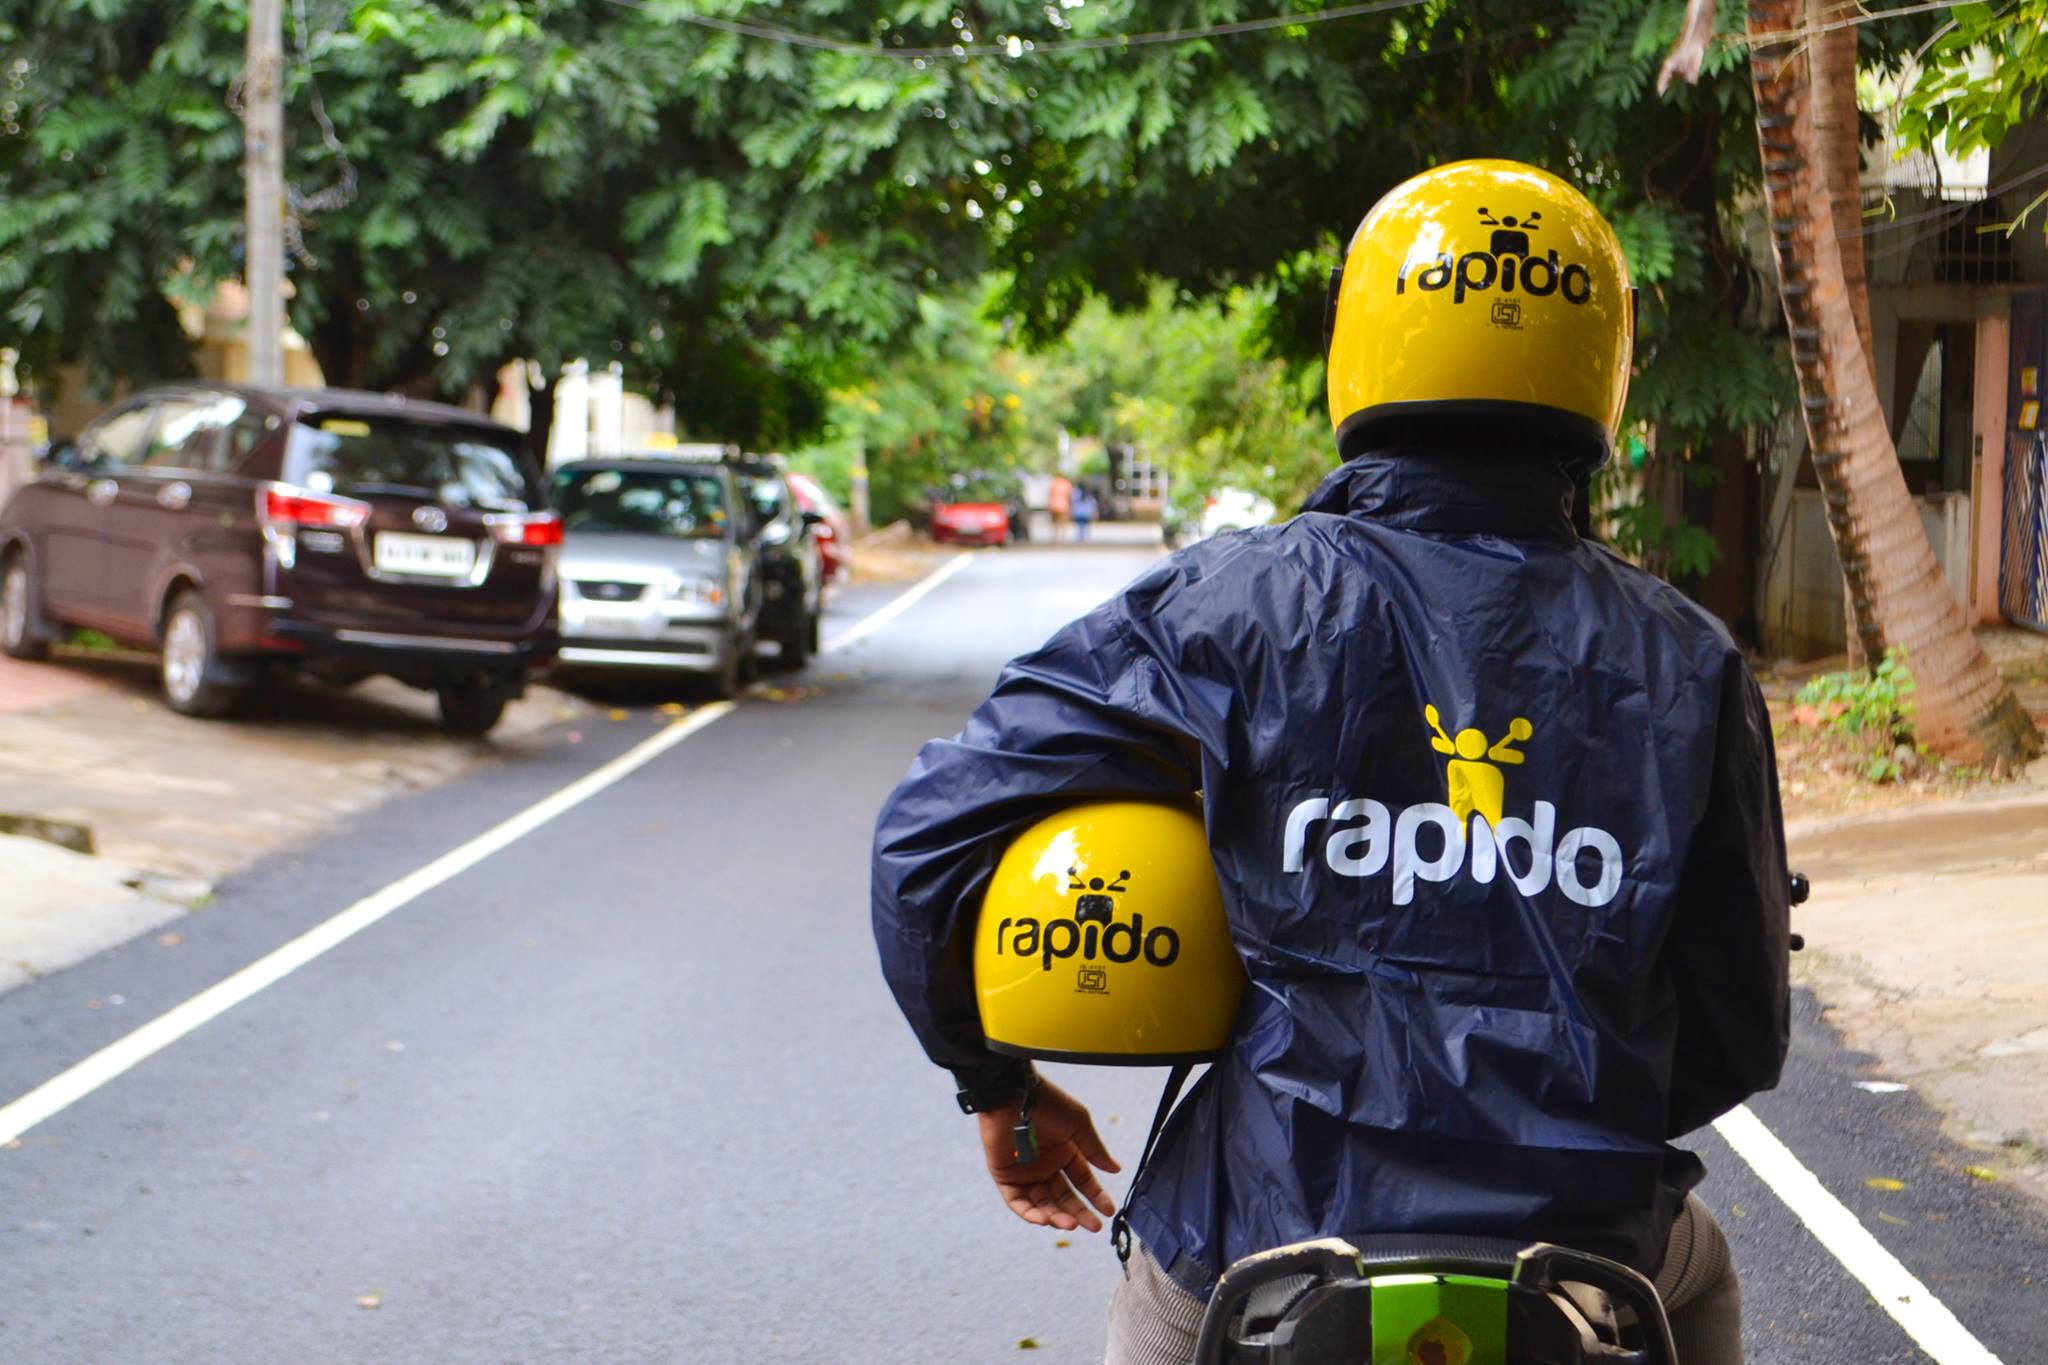 Bike taxi startup Rapido raises USD 52 million from WestBridge Capital and others